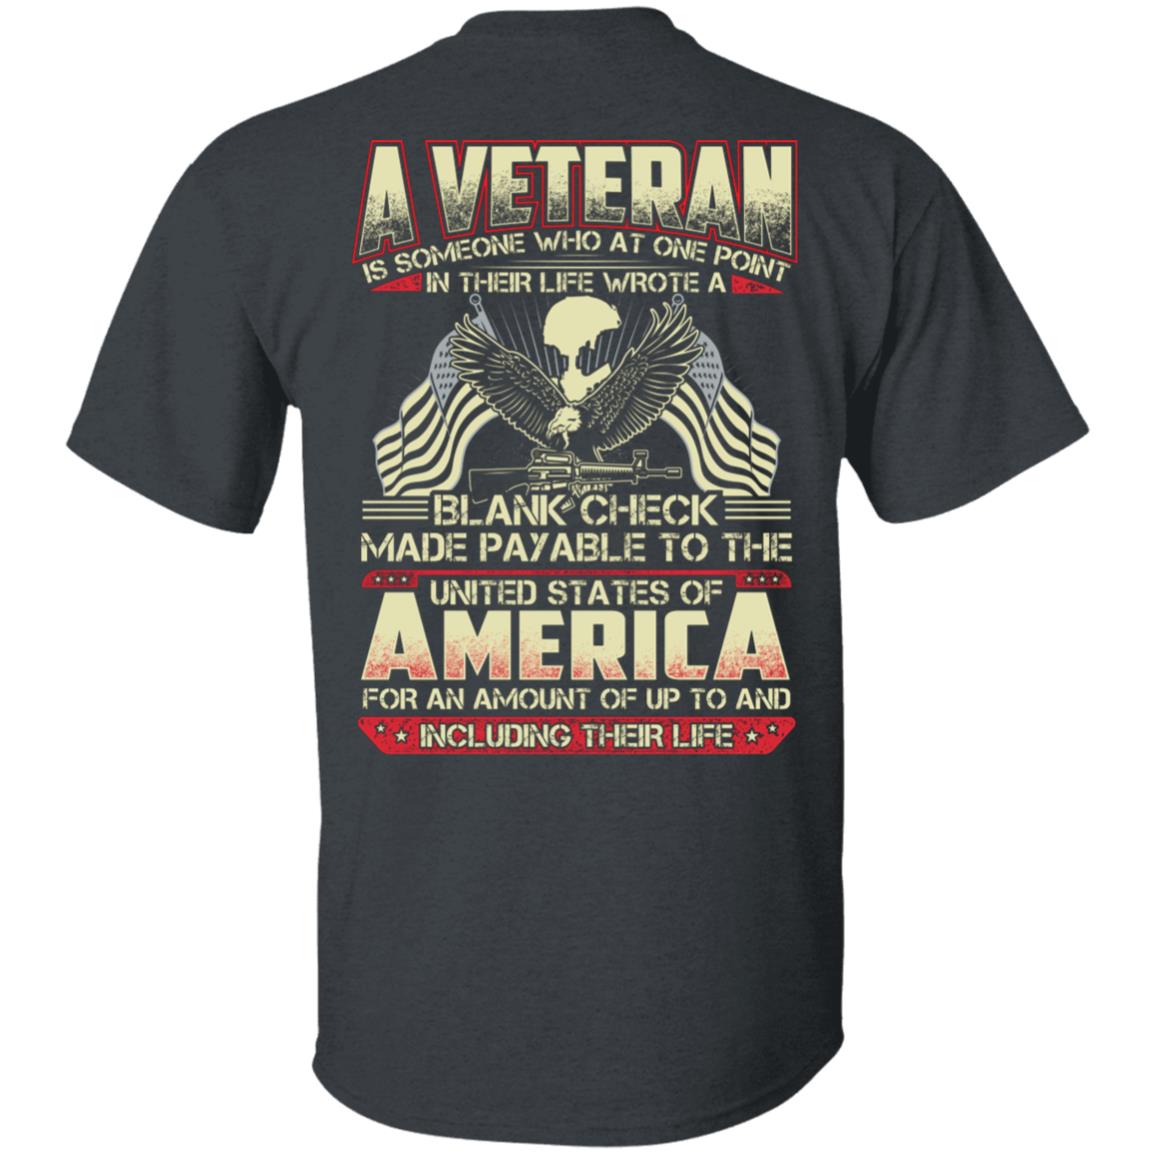 A Veteran is Someone Who at One Point in Their Life Wrote a Blank Check US Veteran Shirt